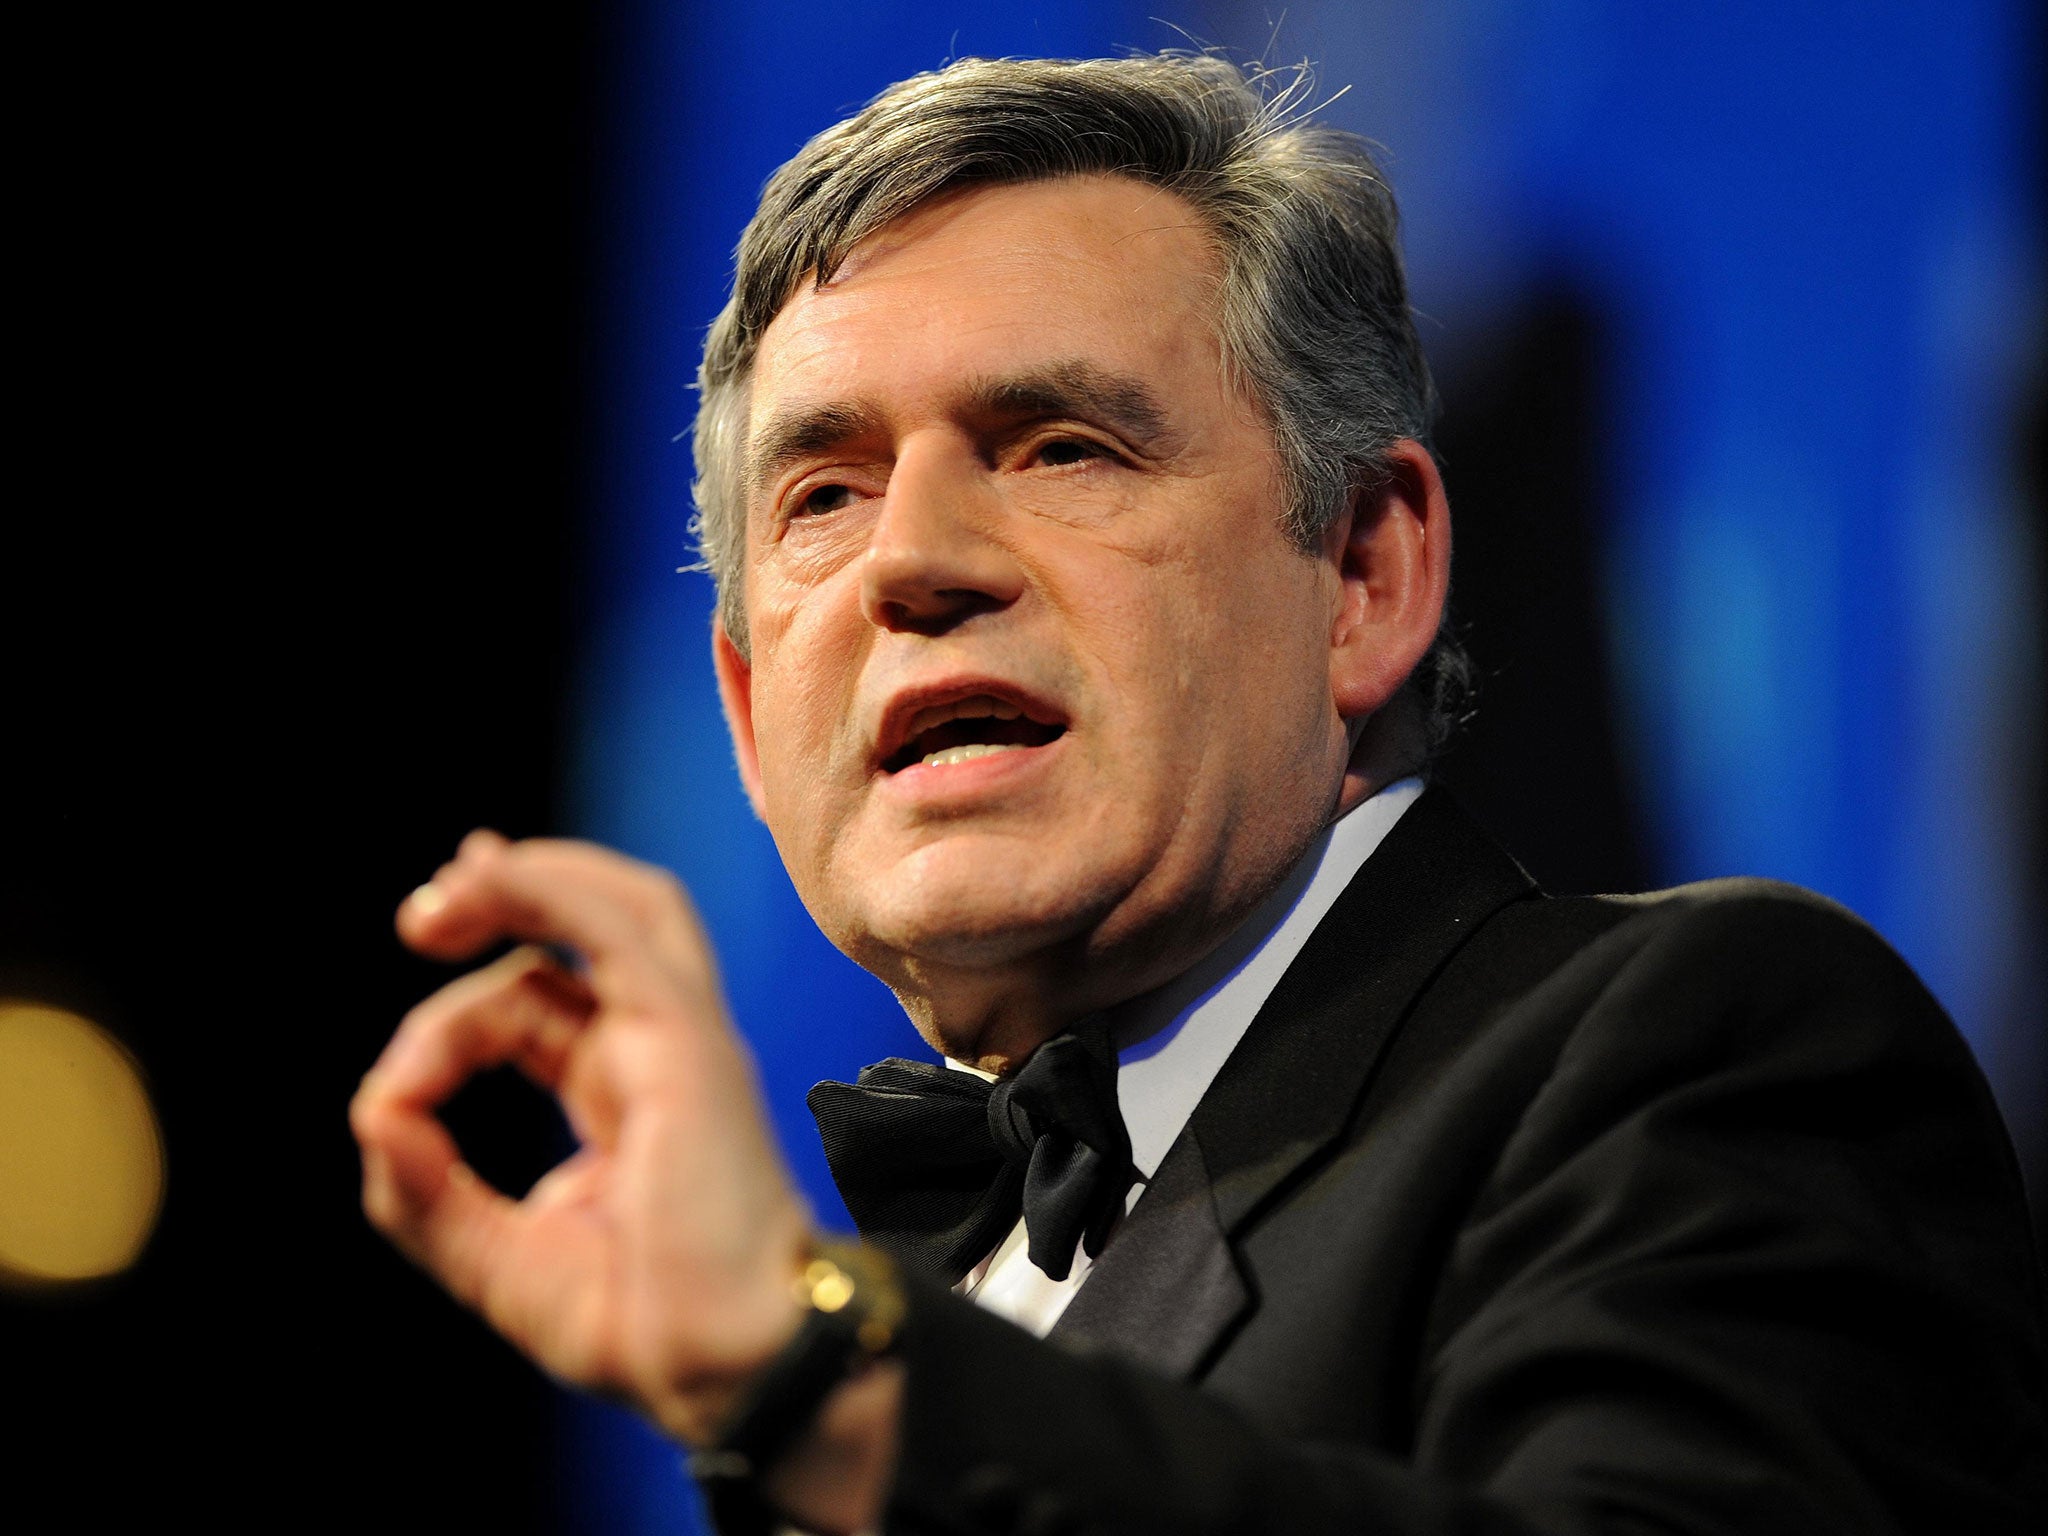 Gordon Brown is believed to be about to commit his support to Yvette Cooper